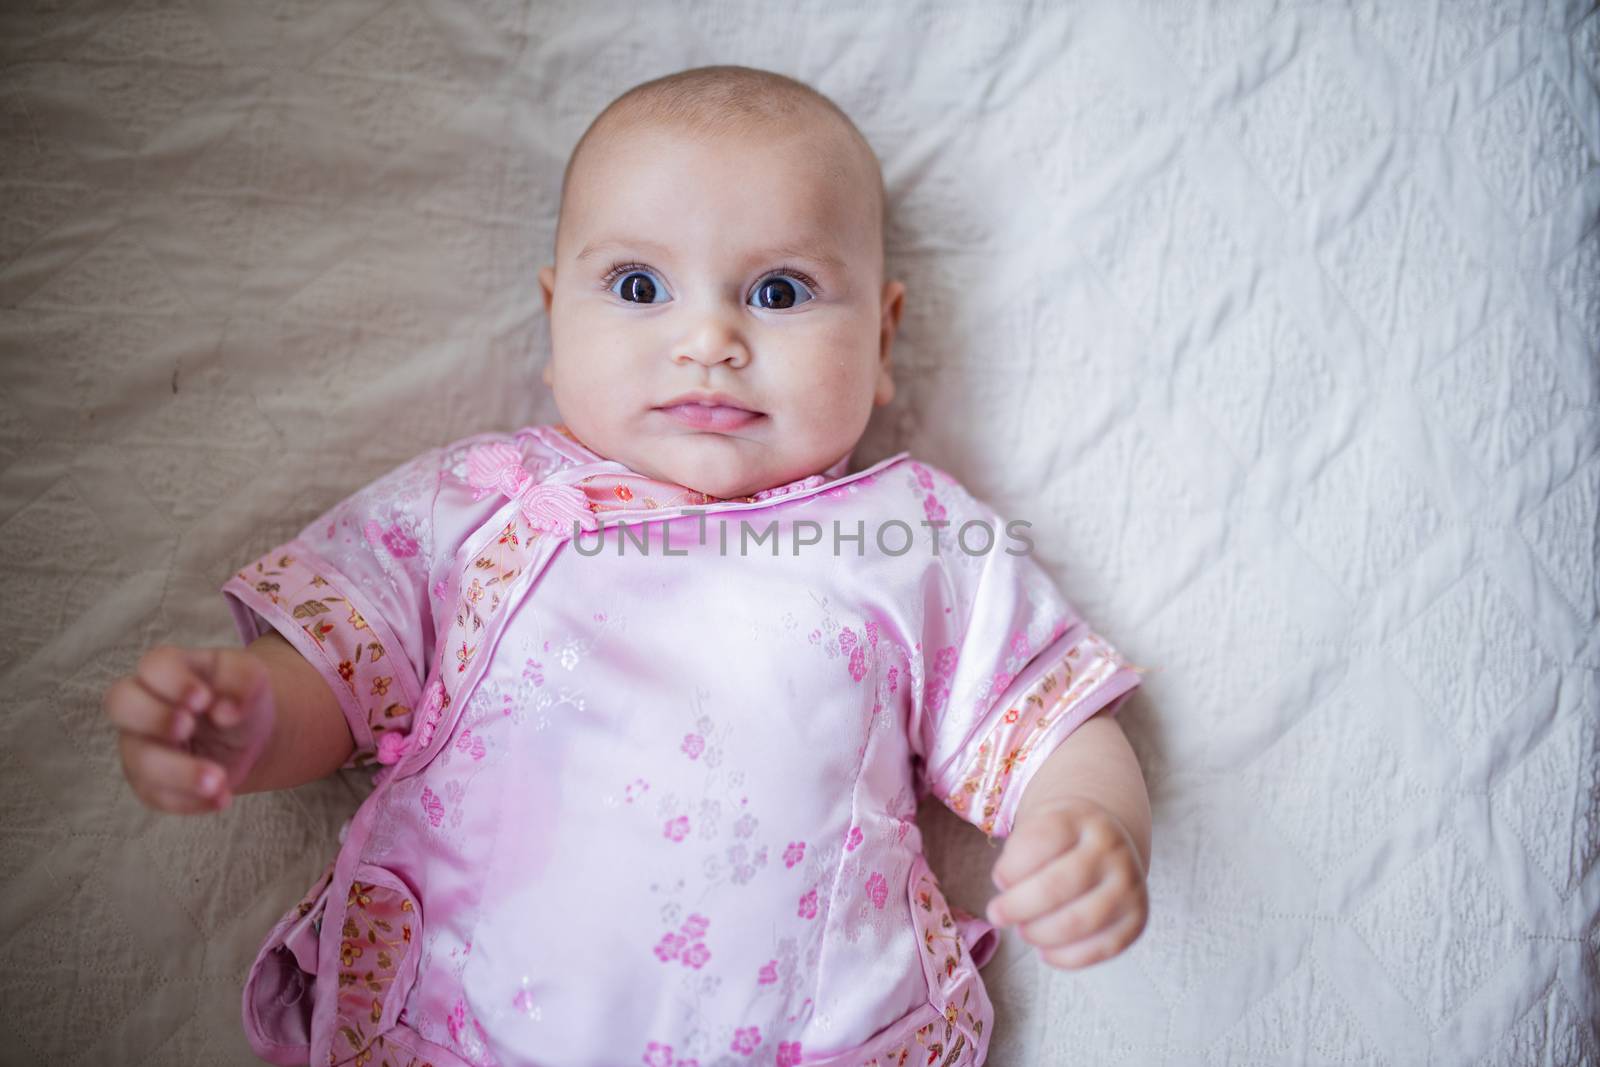 Curious and adorable baby girl in Asian pink attire lying down on a bed by Kanelbulle